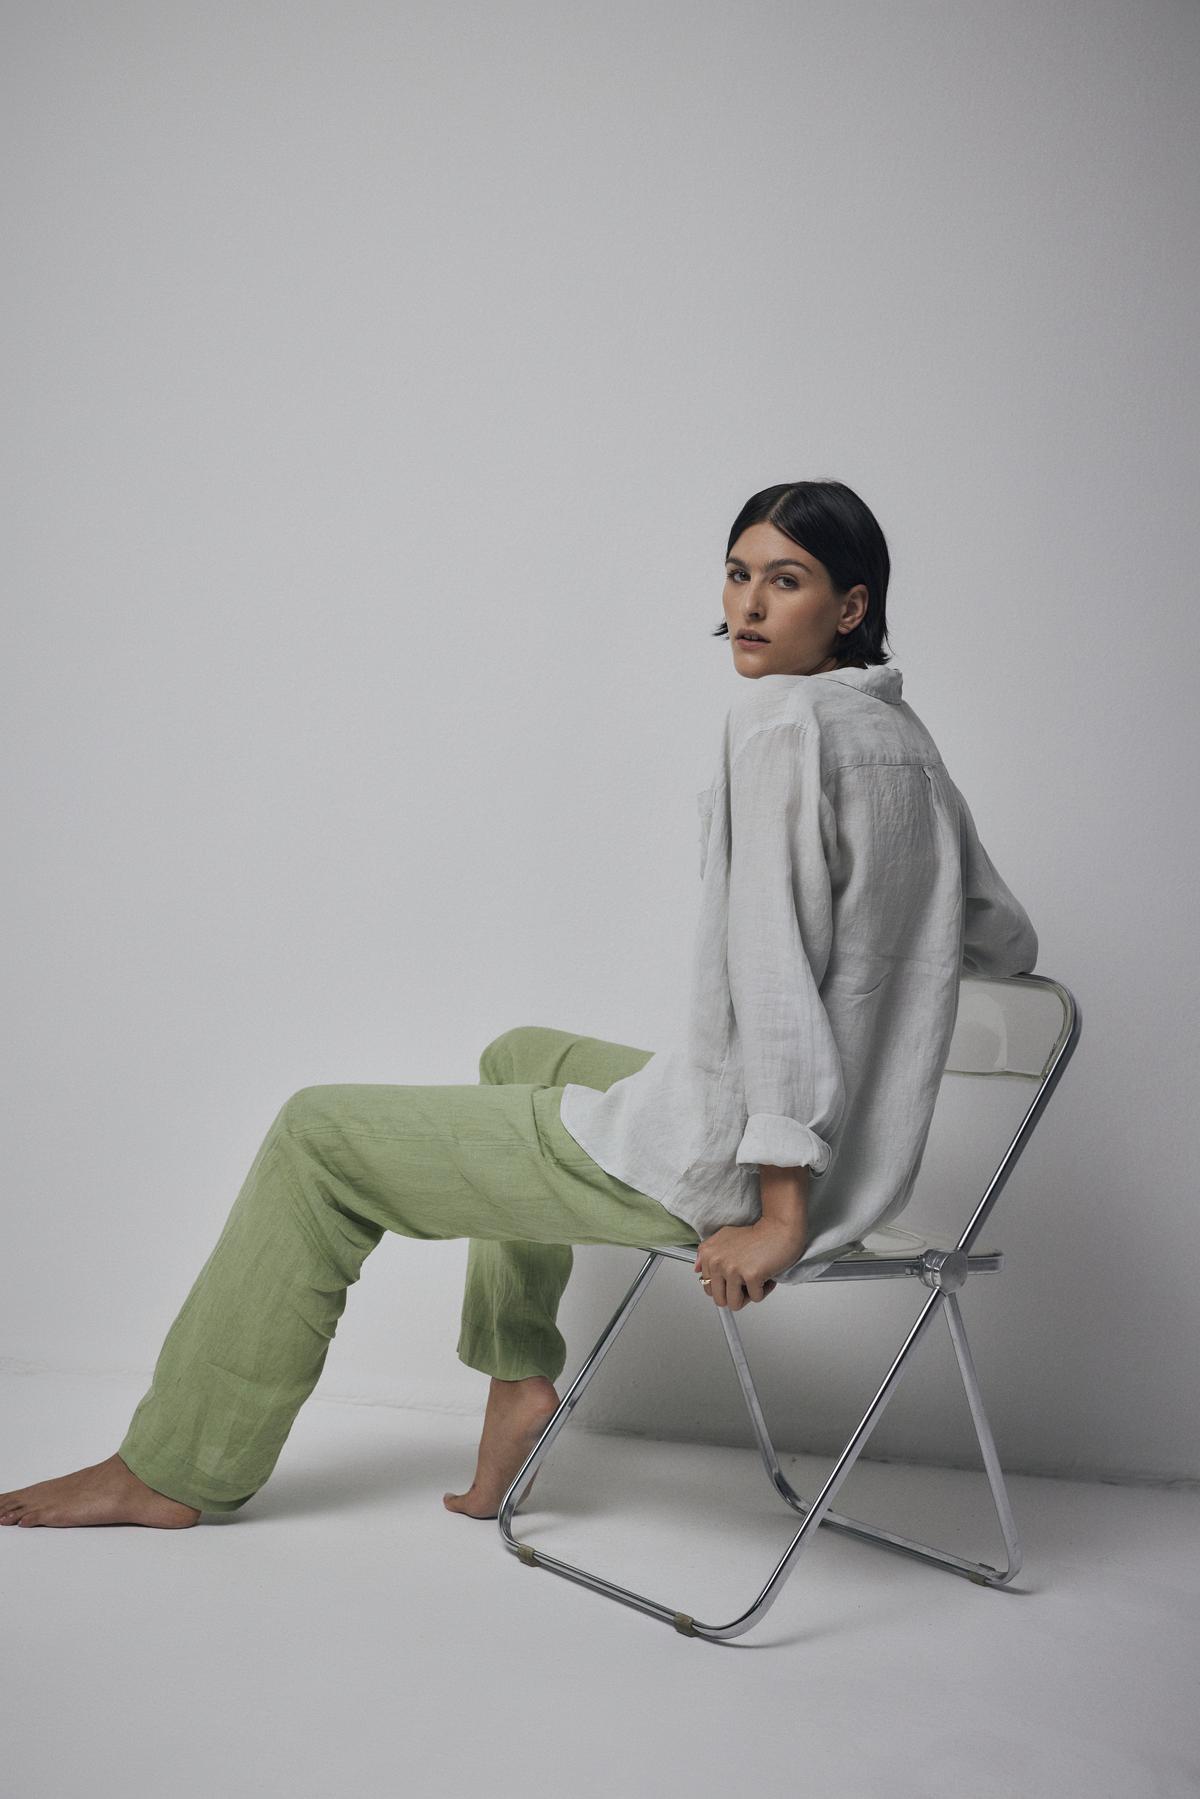 A woman sits on a metal chair against a plain background, wearing a white blouse and Velvet by Jenny Graham's PICO LINEN PANT in green, looking away thoughtfully.-36168858566849